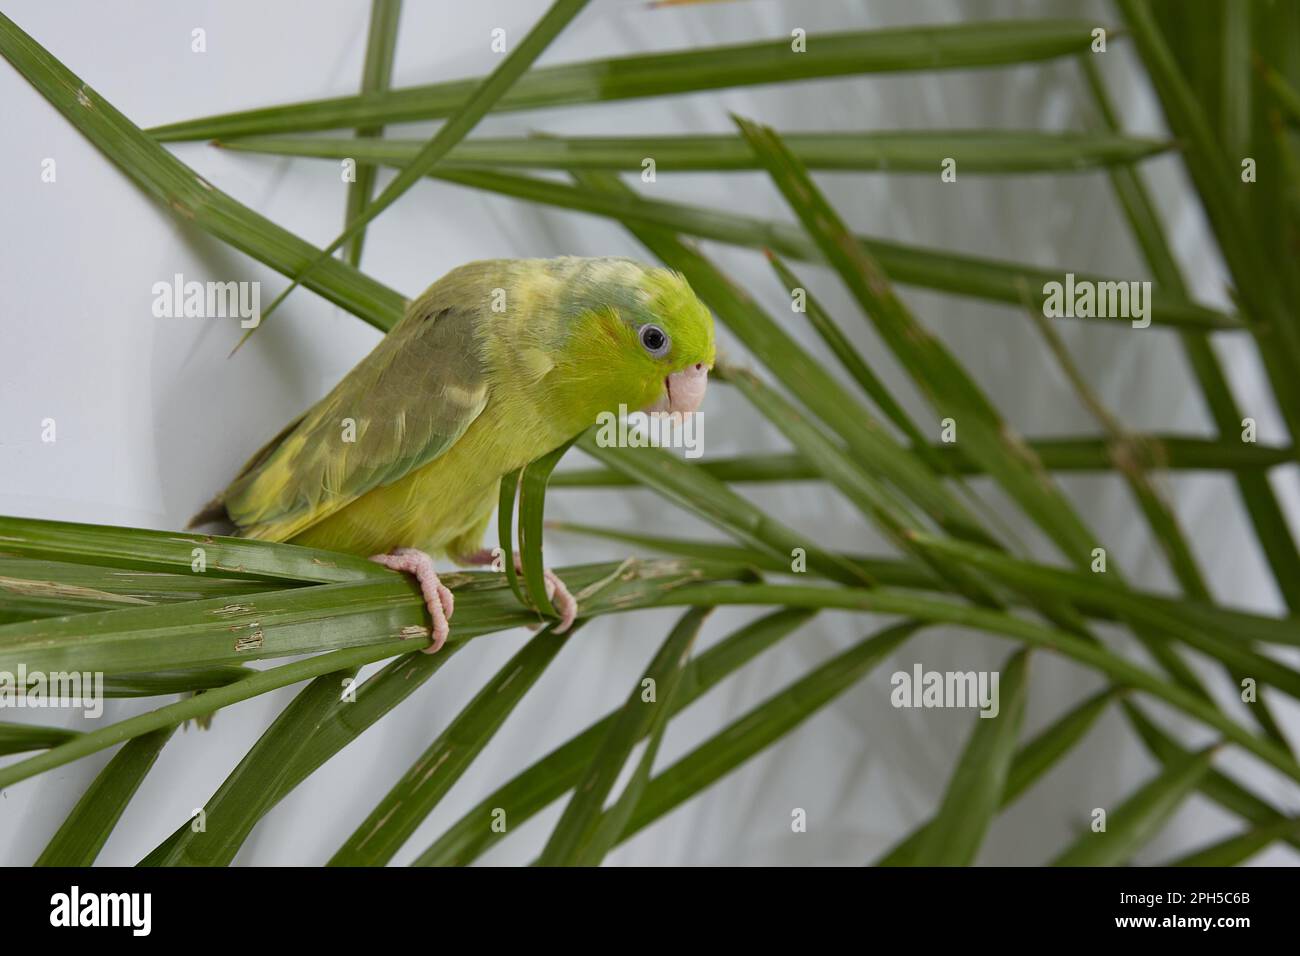 Green parrot forpus on the leaves of a date palm. Stock Photo